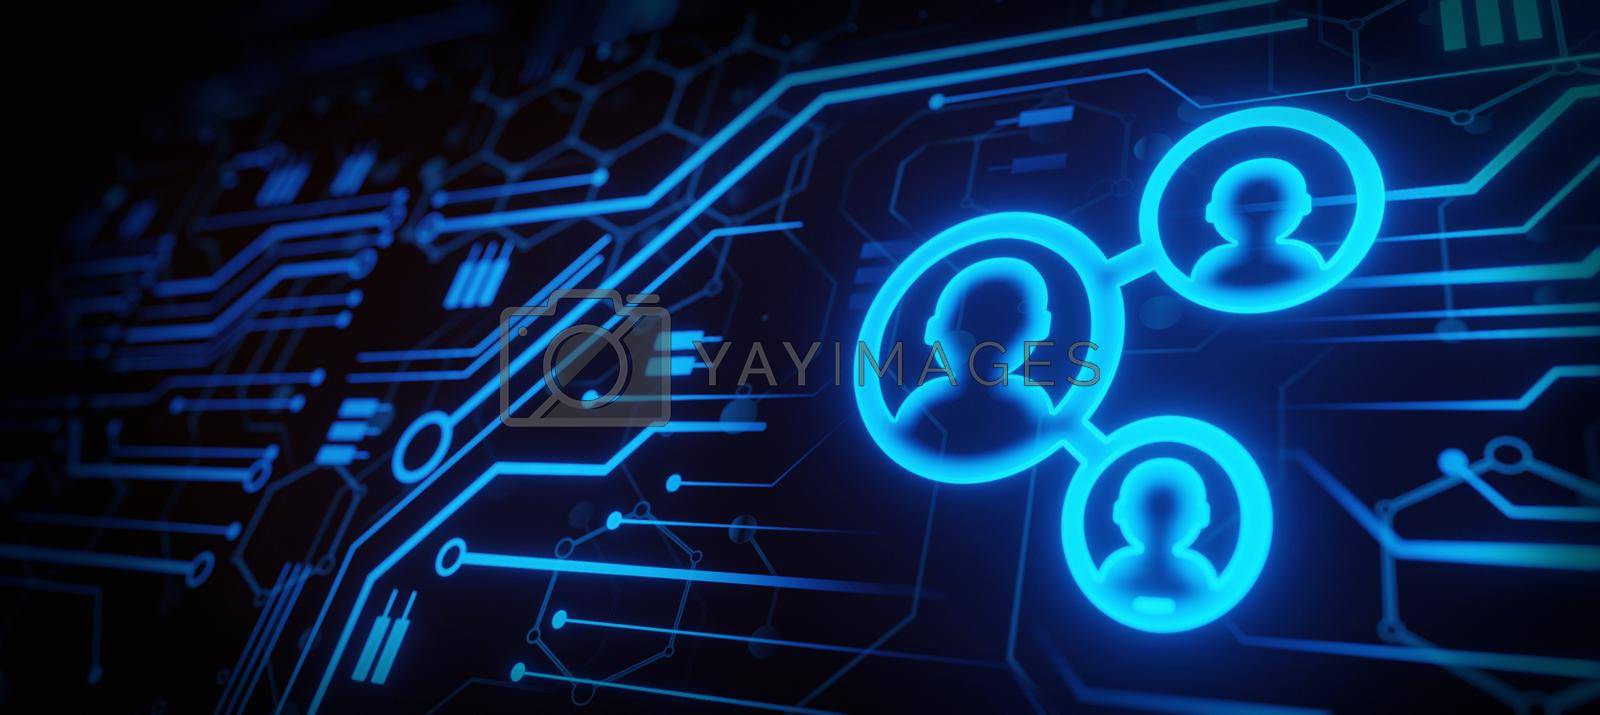 Royalty free image of Users network concept digital blue holographic user interface 3D rendering by yay_lmrb